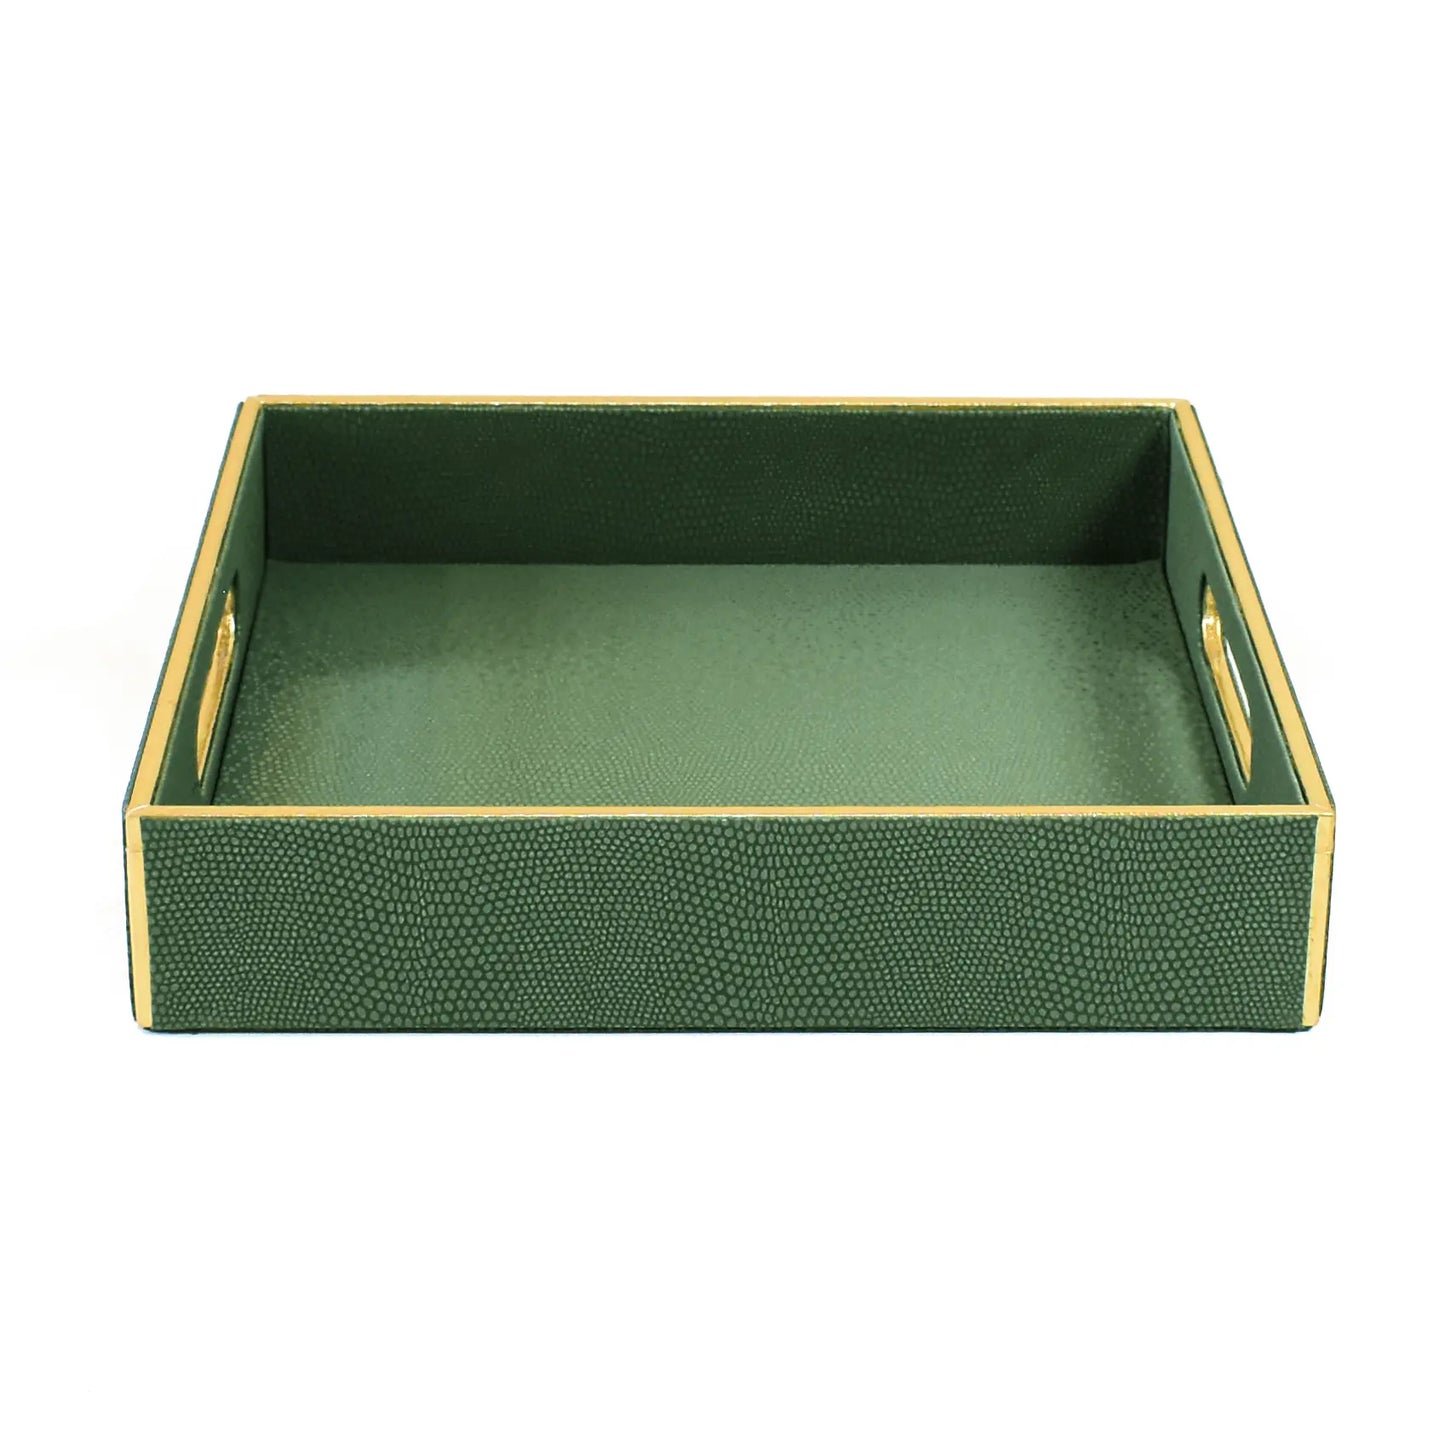 Leatherette Square Serving Tray Set of 2 | Olive Green | Serpentine Ichkan